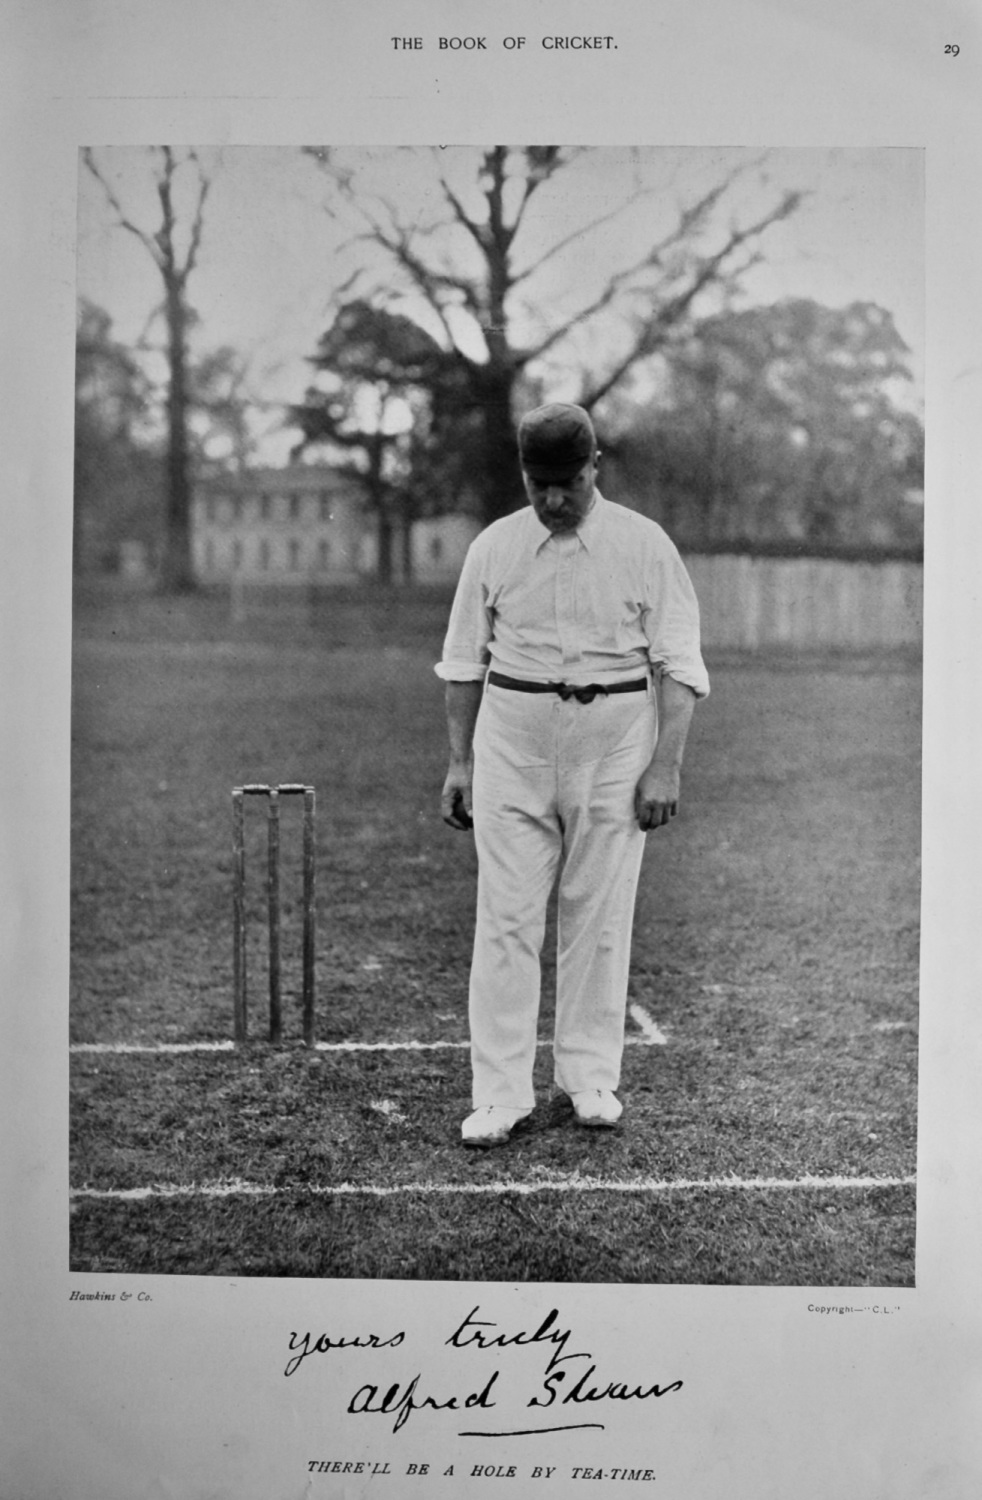 Alfred Shaw.  1899.  (Cricketer).